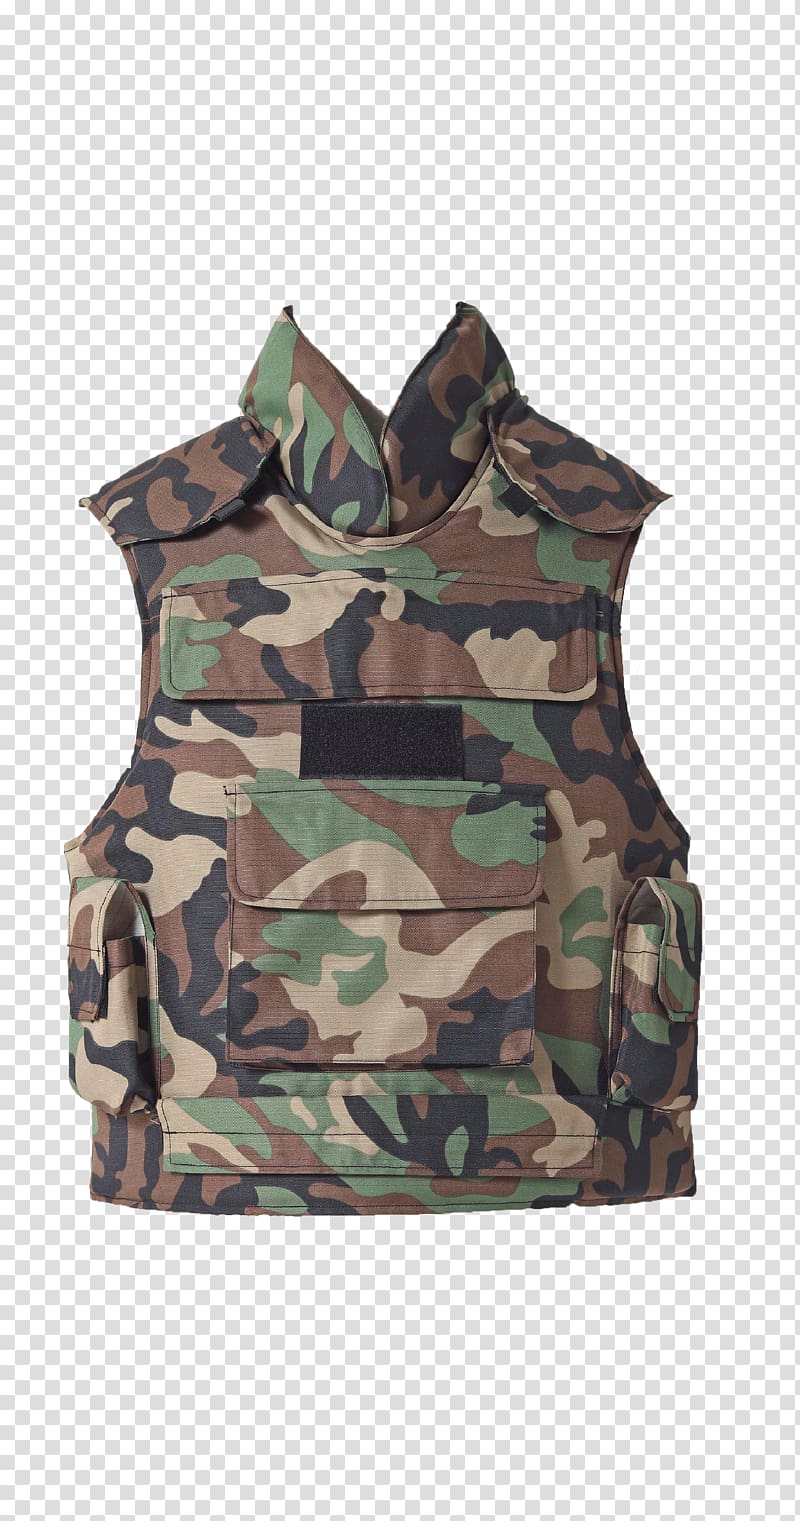 Military camouflage Bullet Proof Vests Gilets Waistcoat, Soldier transparent background PNG clipart